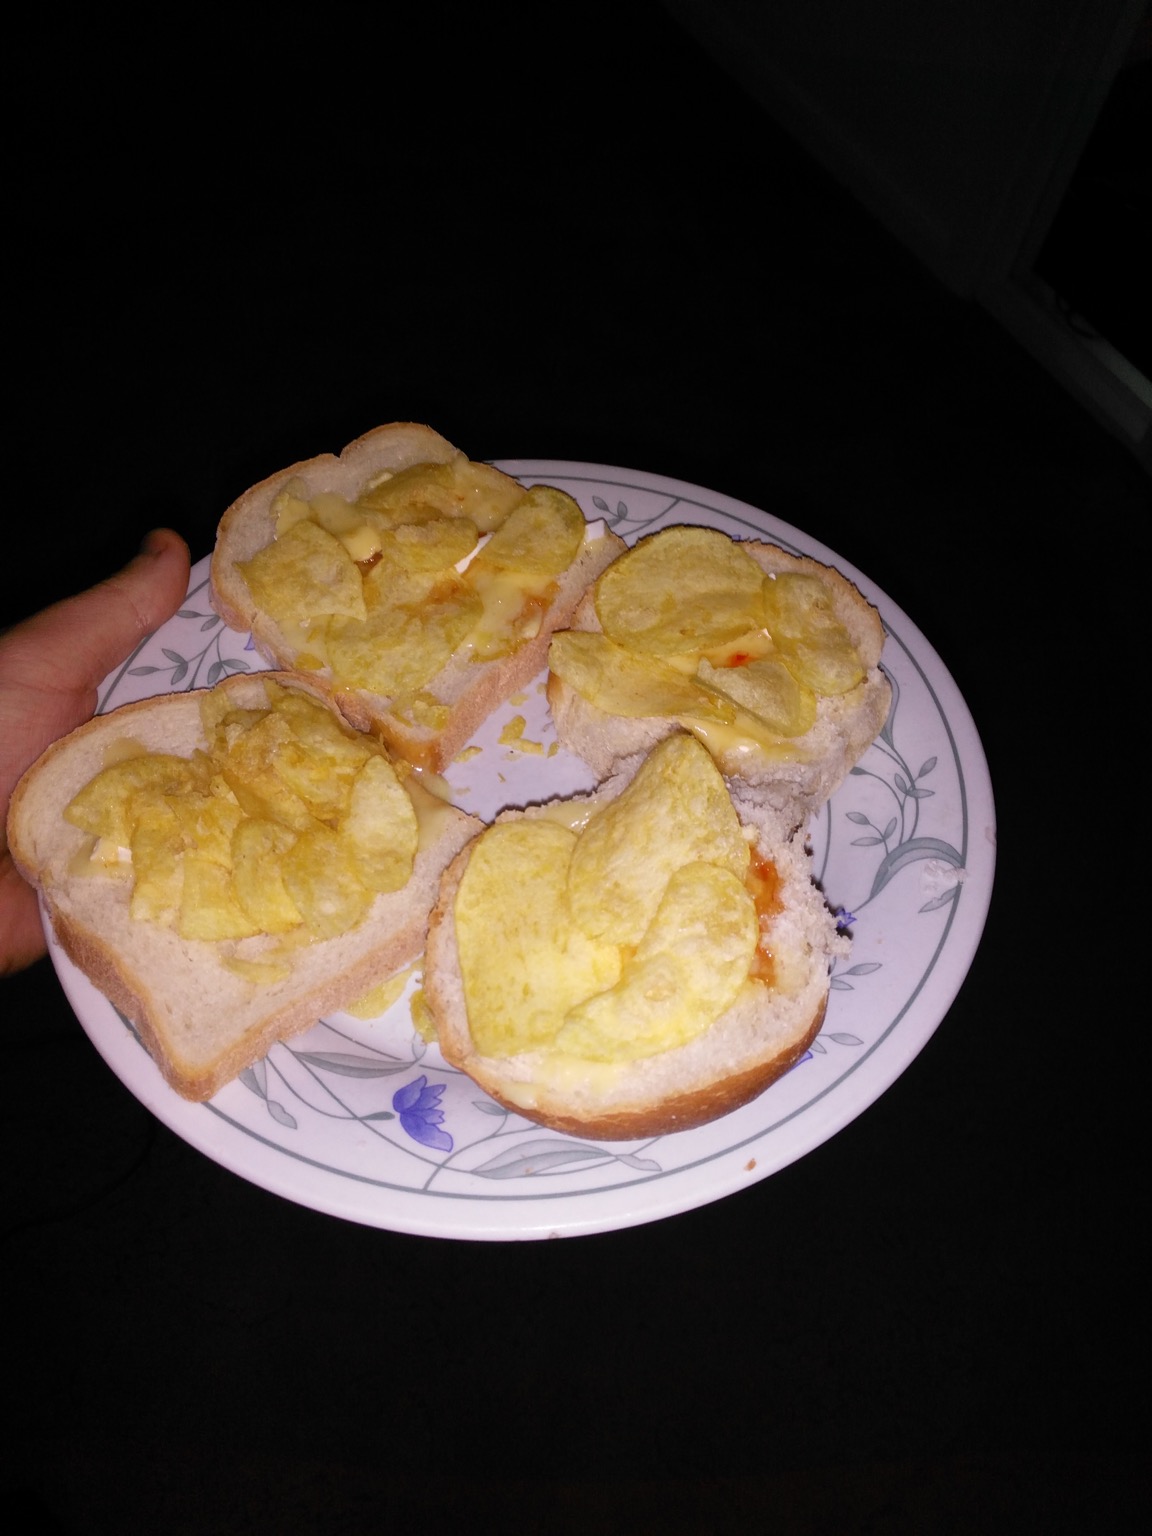 Flash photo of crisps and cheese on bread and roll